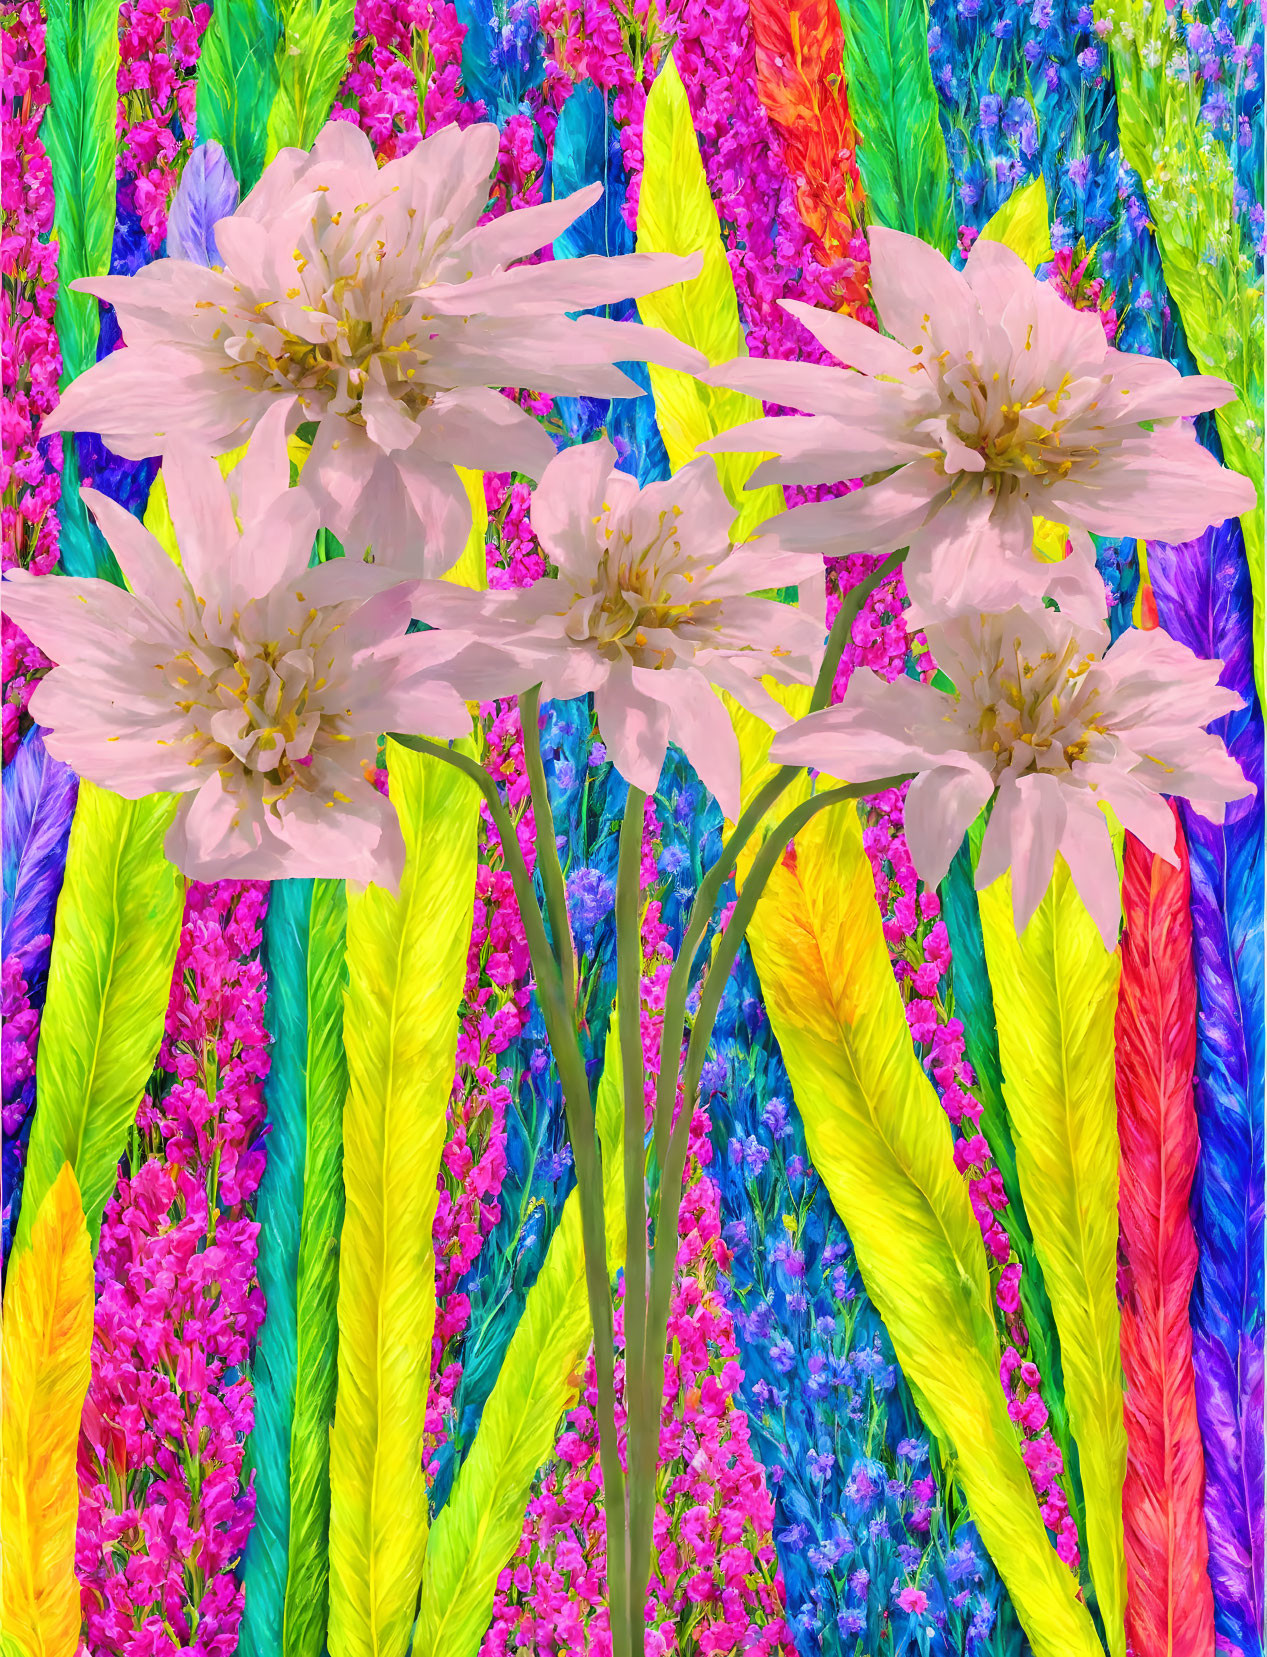 Colorful Floral Mosaic with Pink Flowers and Leaves